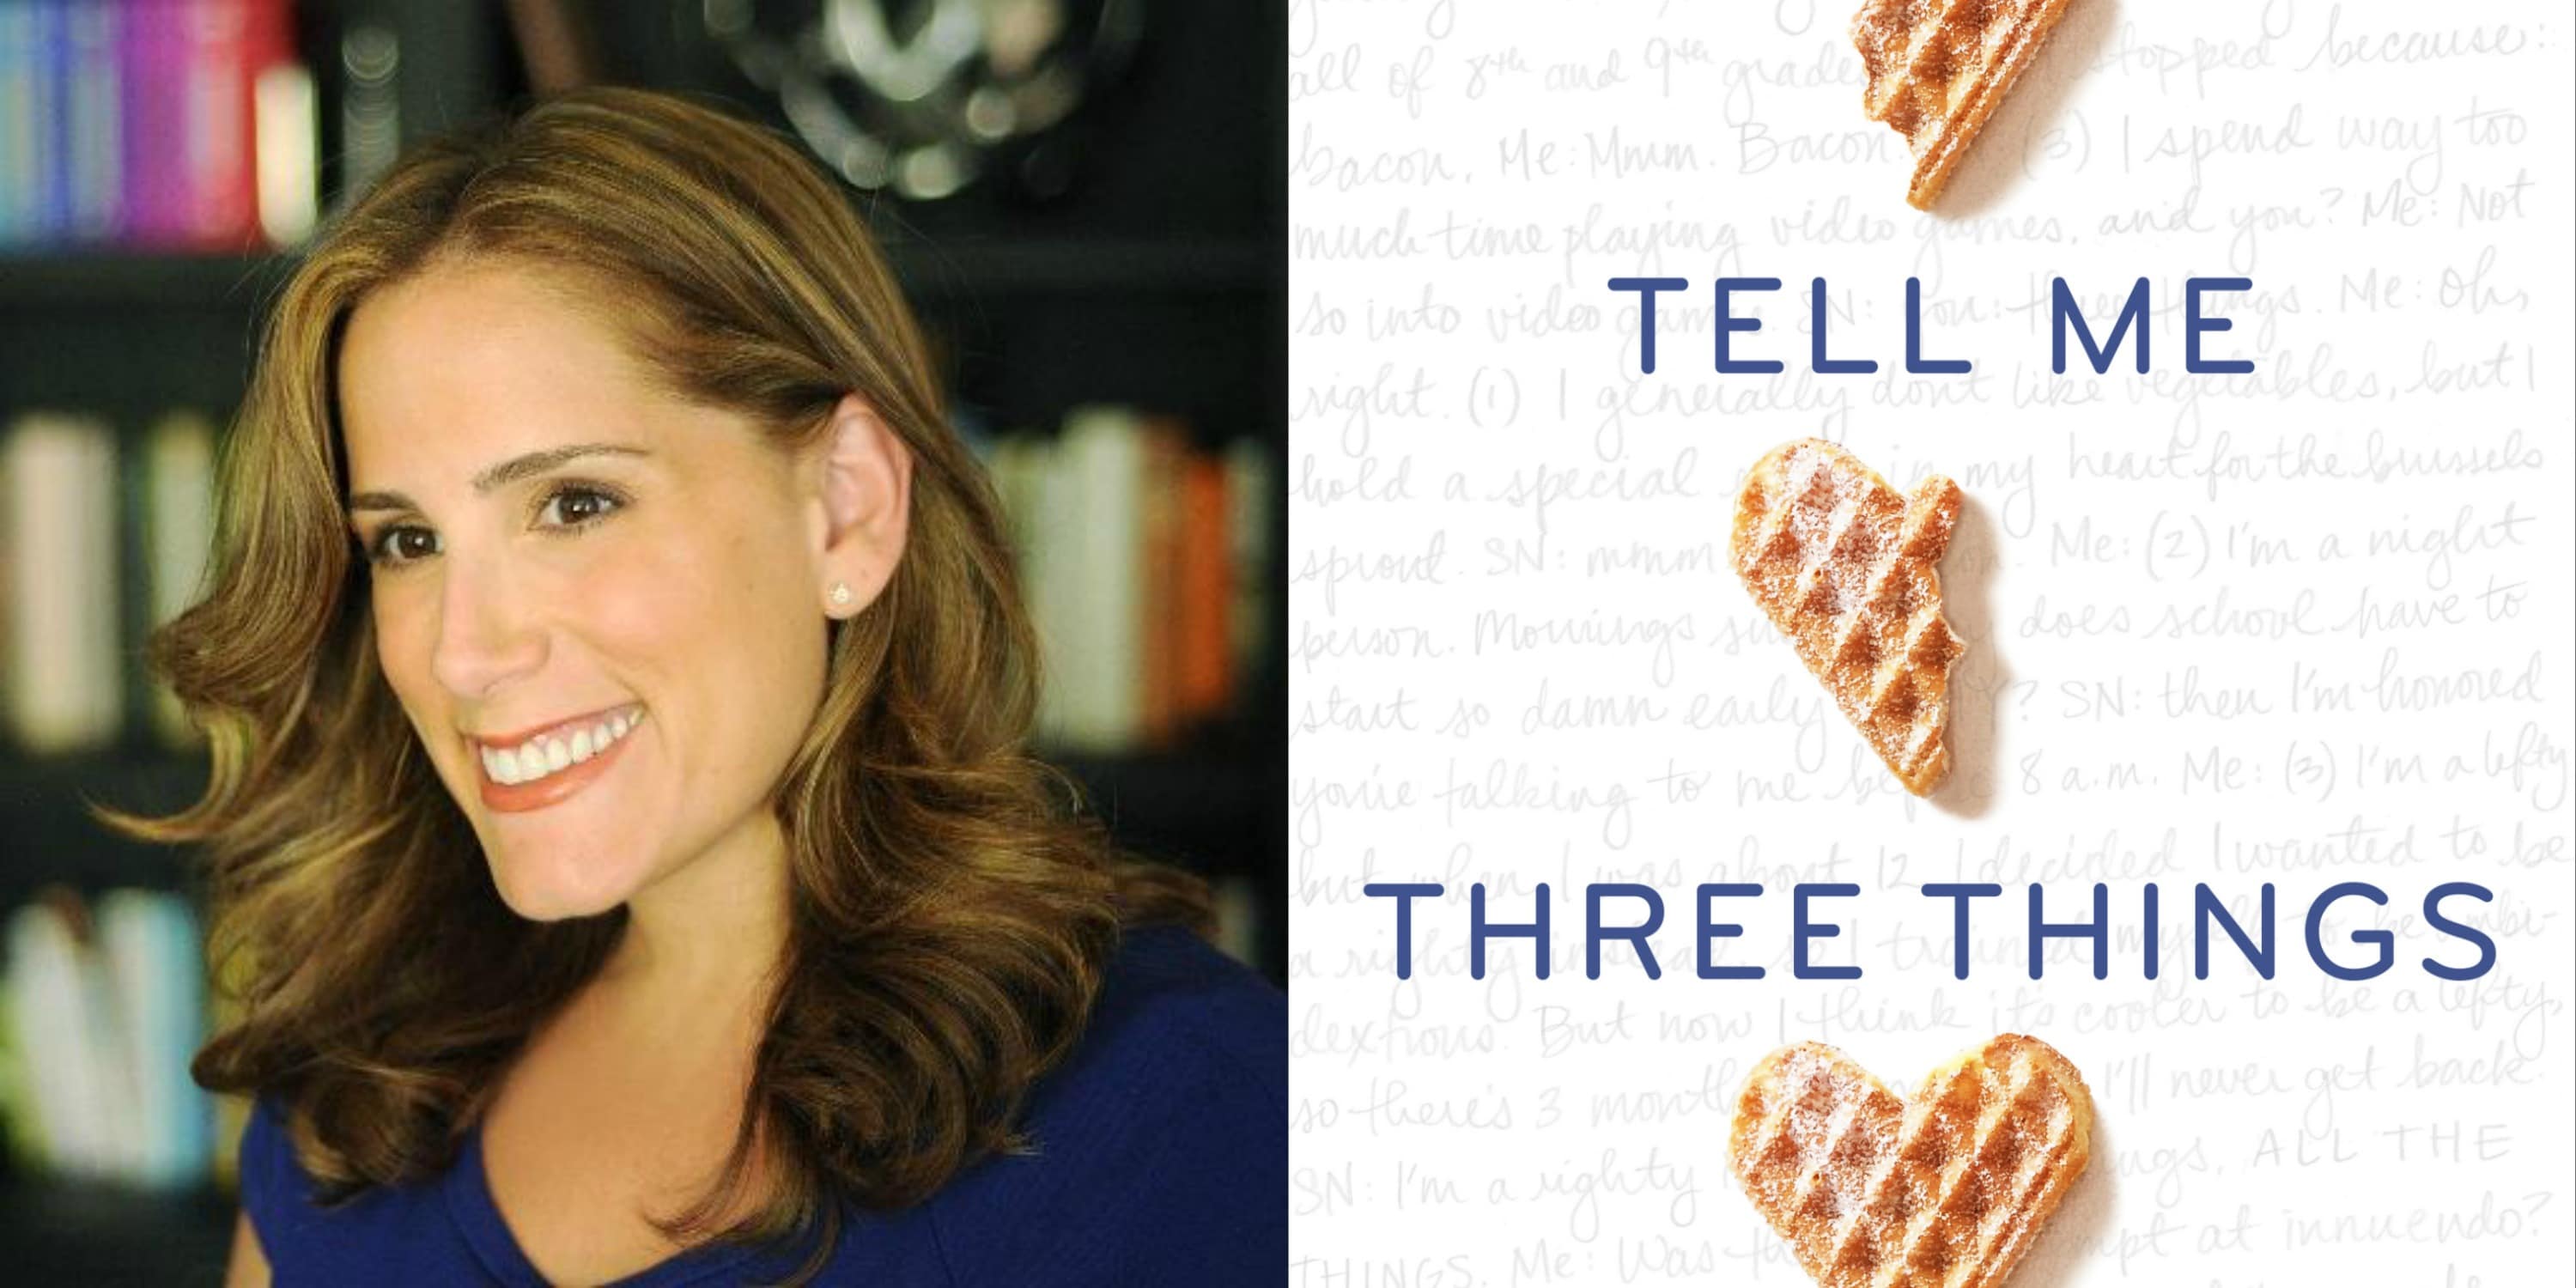 Sundays With Writers: Tell Me Three Things by Julie Buxbaum